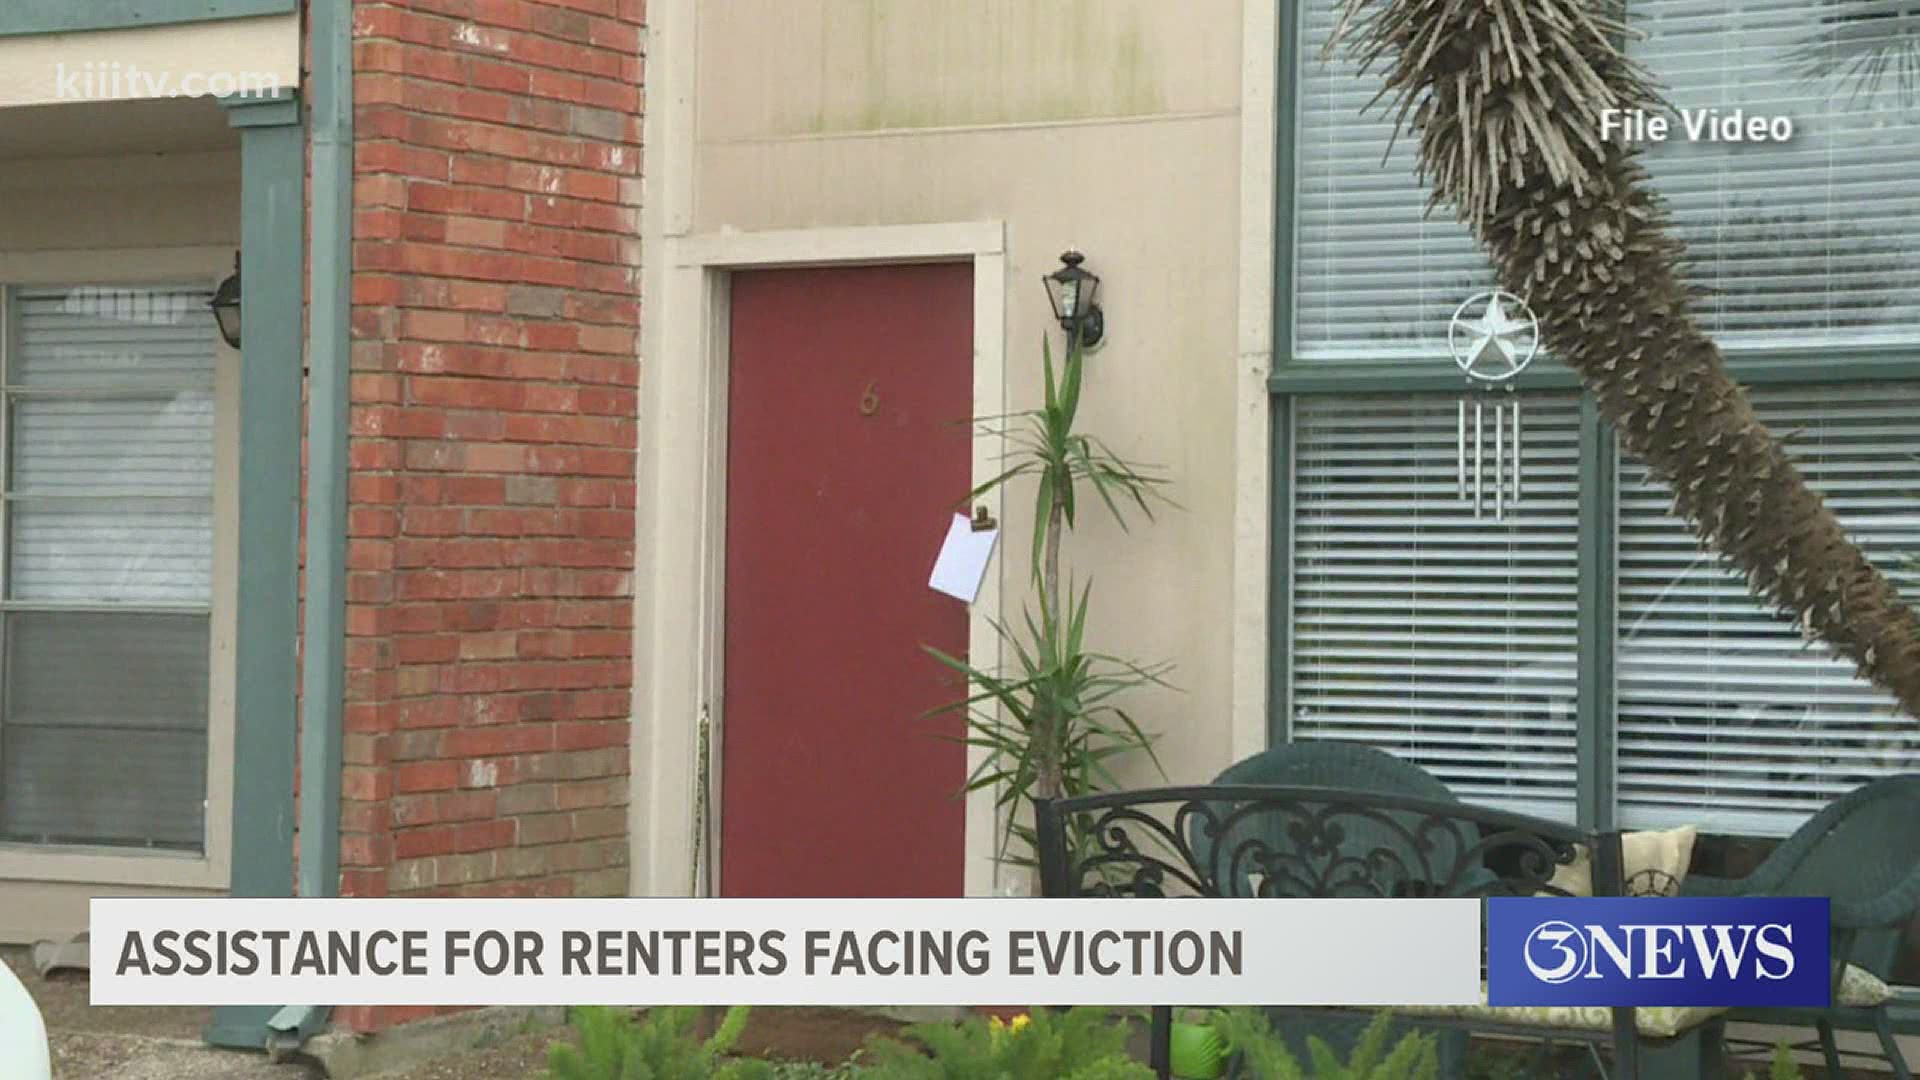 “Stop TX Eviction” was created to help tenants not only stay in their homes, but also provide information about the legal rights and help available for them.